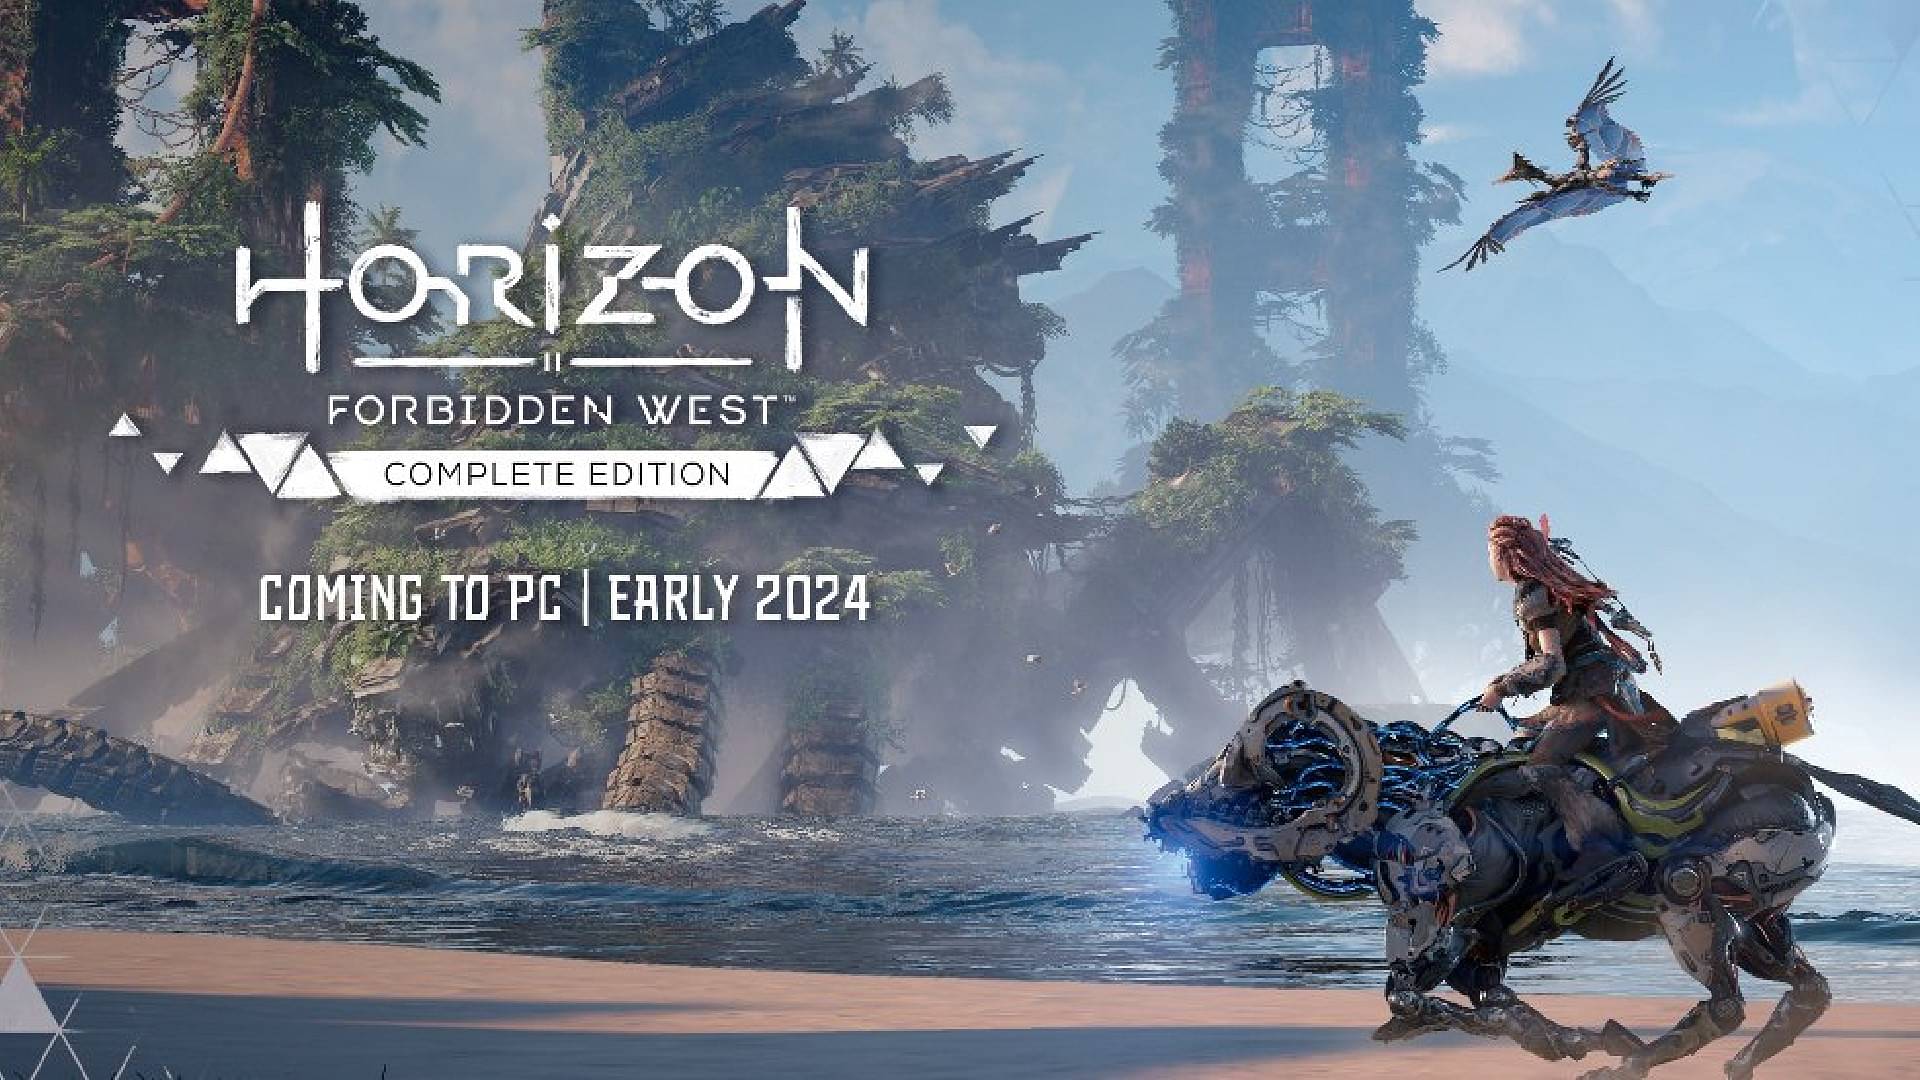 Sony is reportedly bringing Horizon Forbidden West to PC very soon